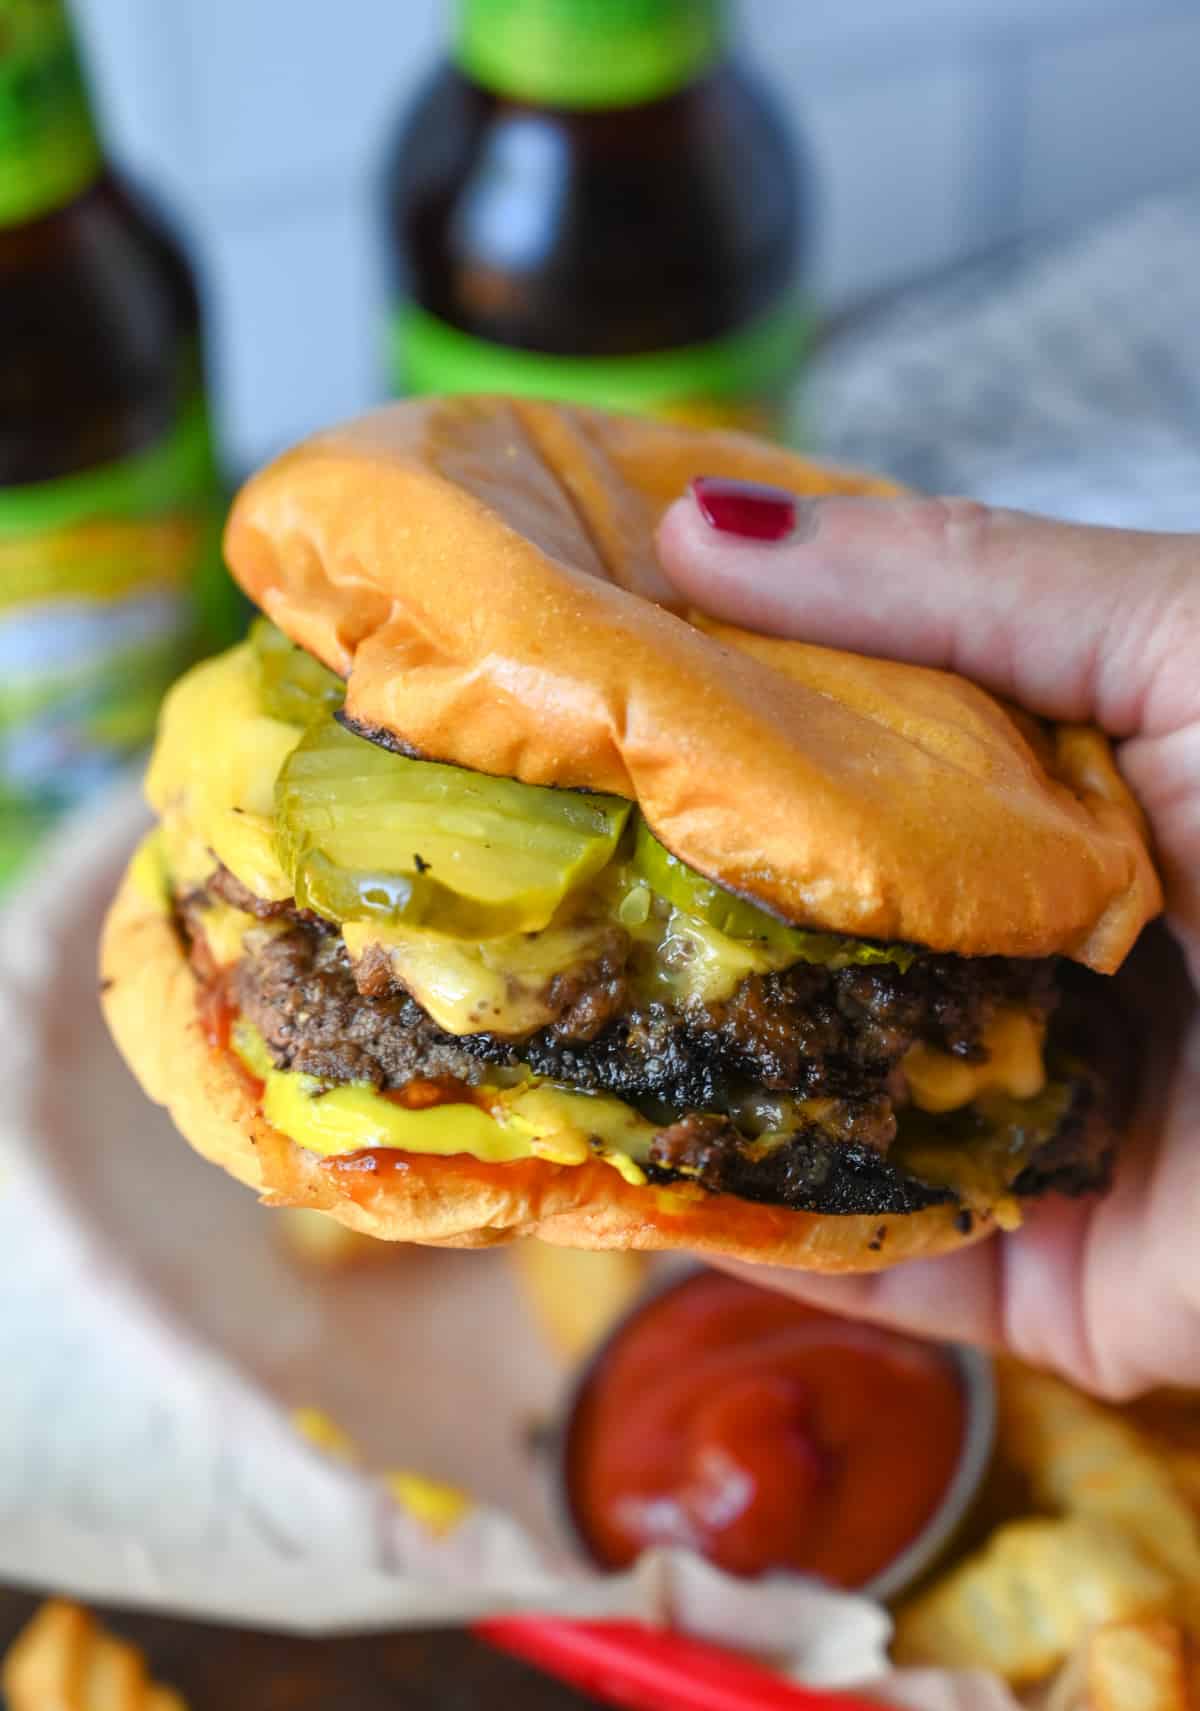 Smash burger with cheese and pickles being held in a hand.